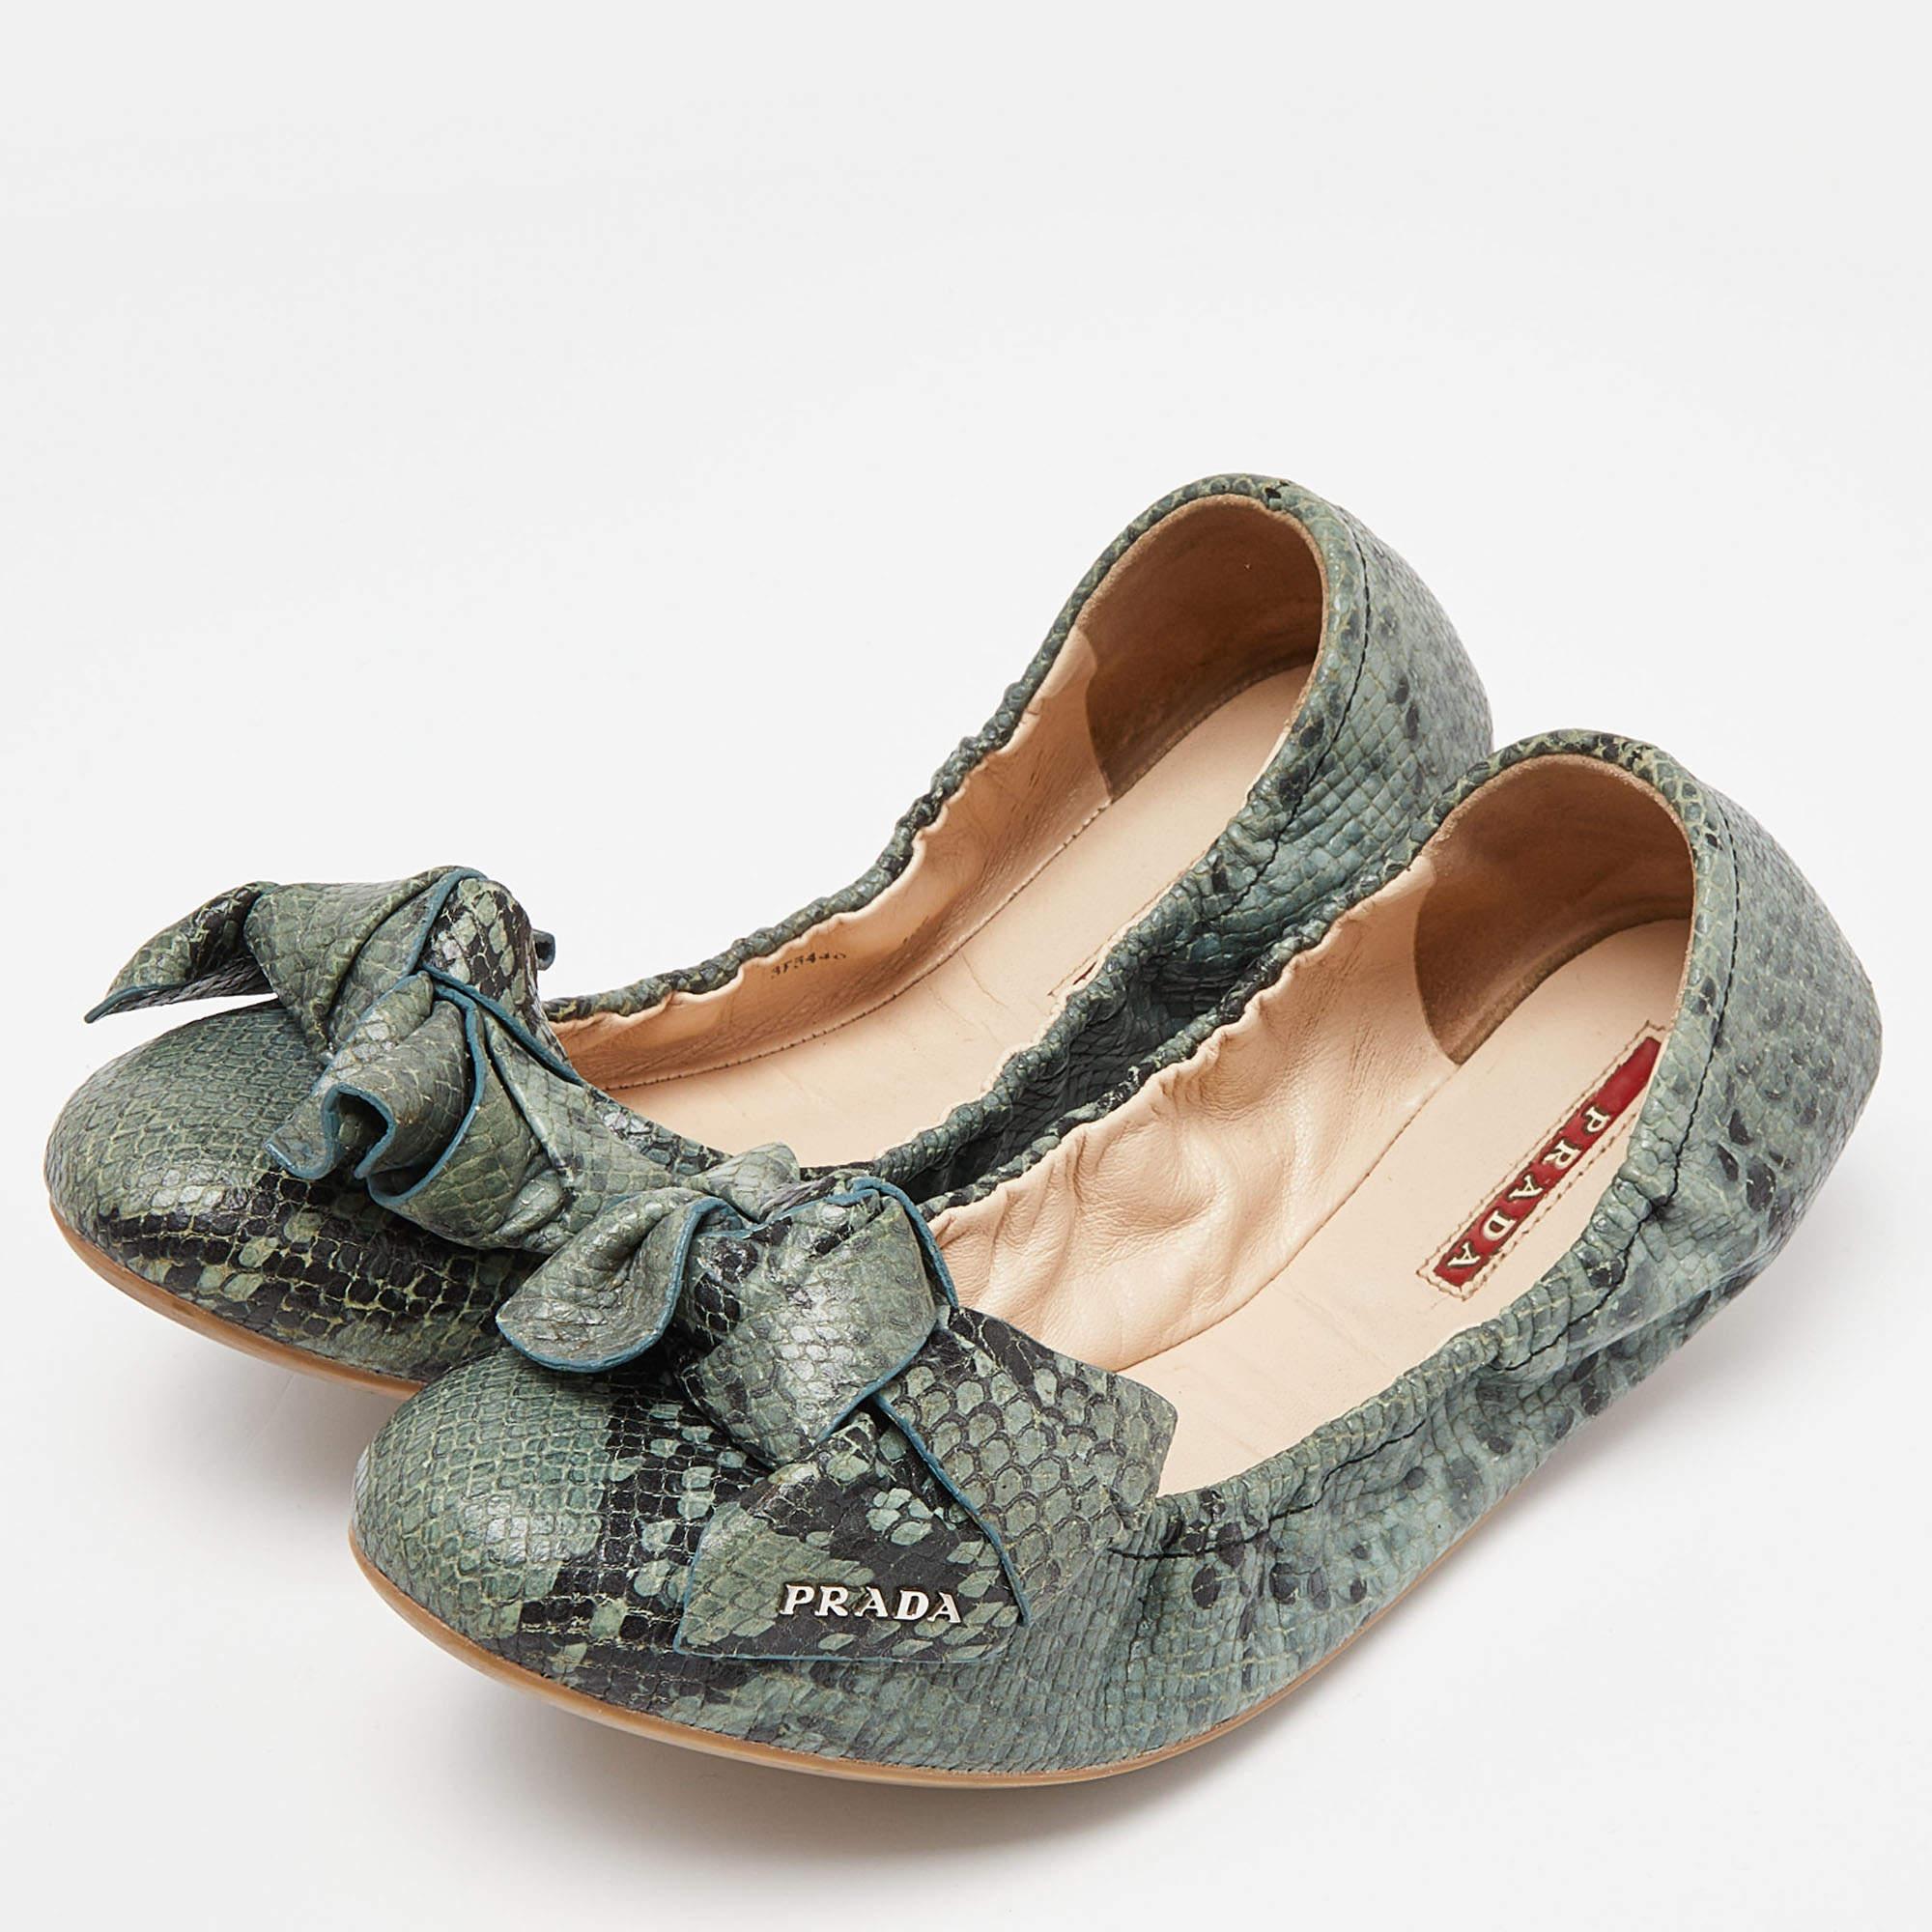 Prada Blue Python Embossed Leather Scrunch Bow Ballet Flats Size 40.5 In Good Condition For Sale In Dubai, Al Qouz 2